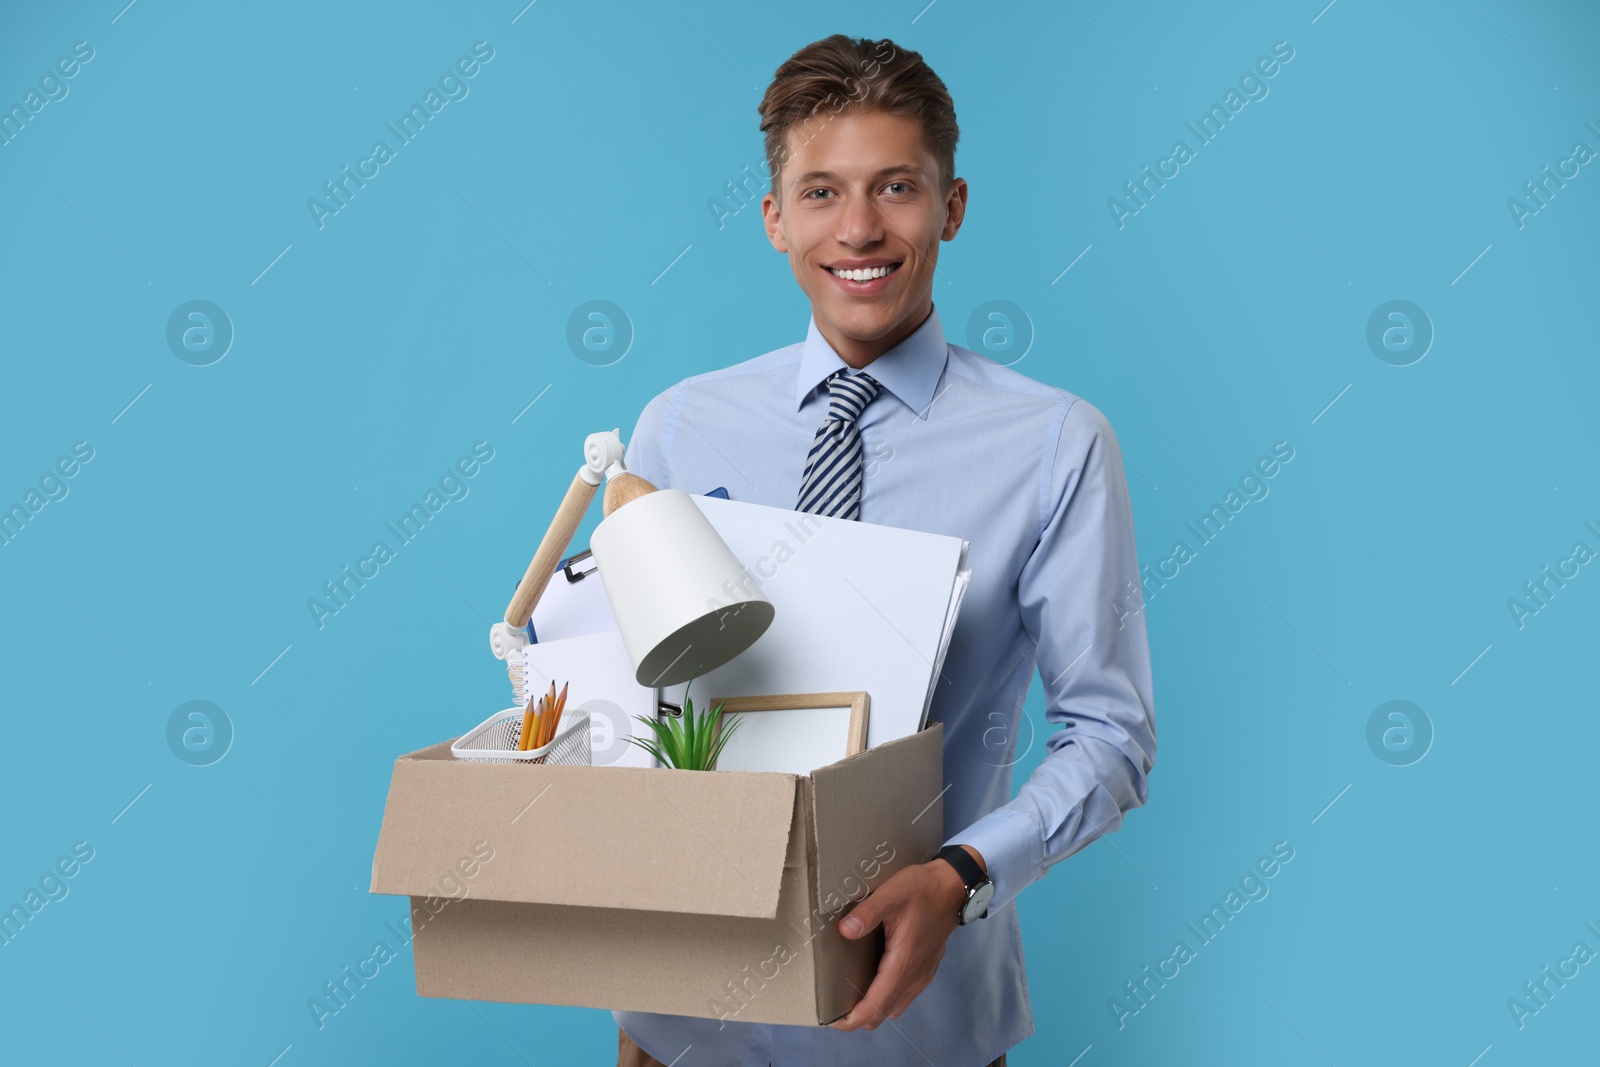 Photo of Happy unemployed young man with box of personal office belongings on light blue background